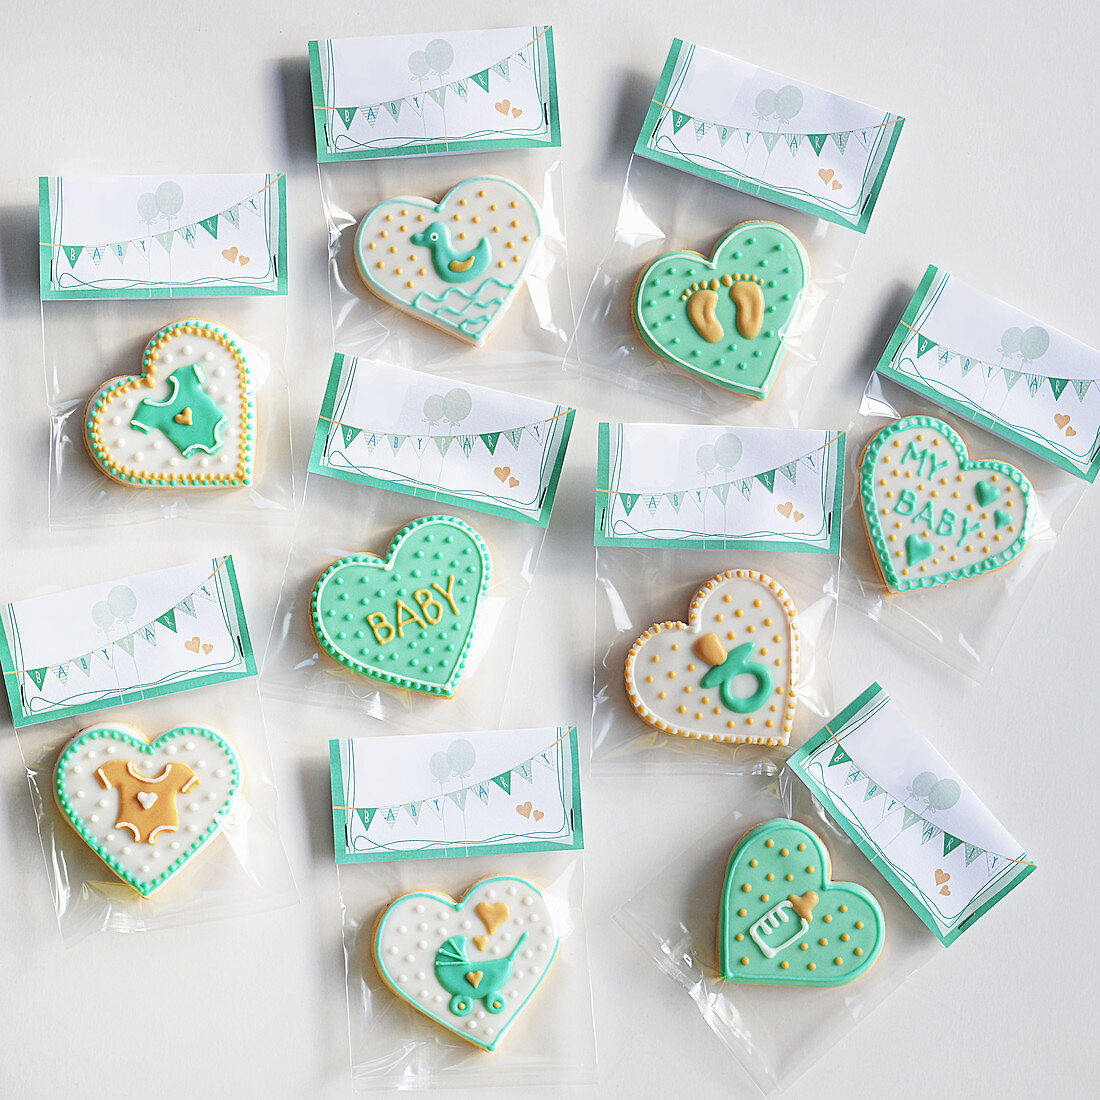 Motif cookies for a baby party, packed in sachets for gifting